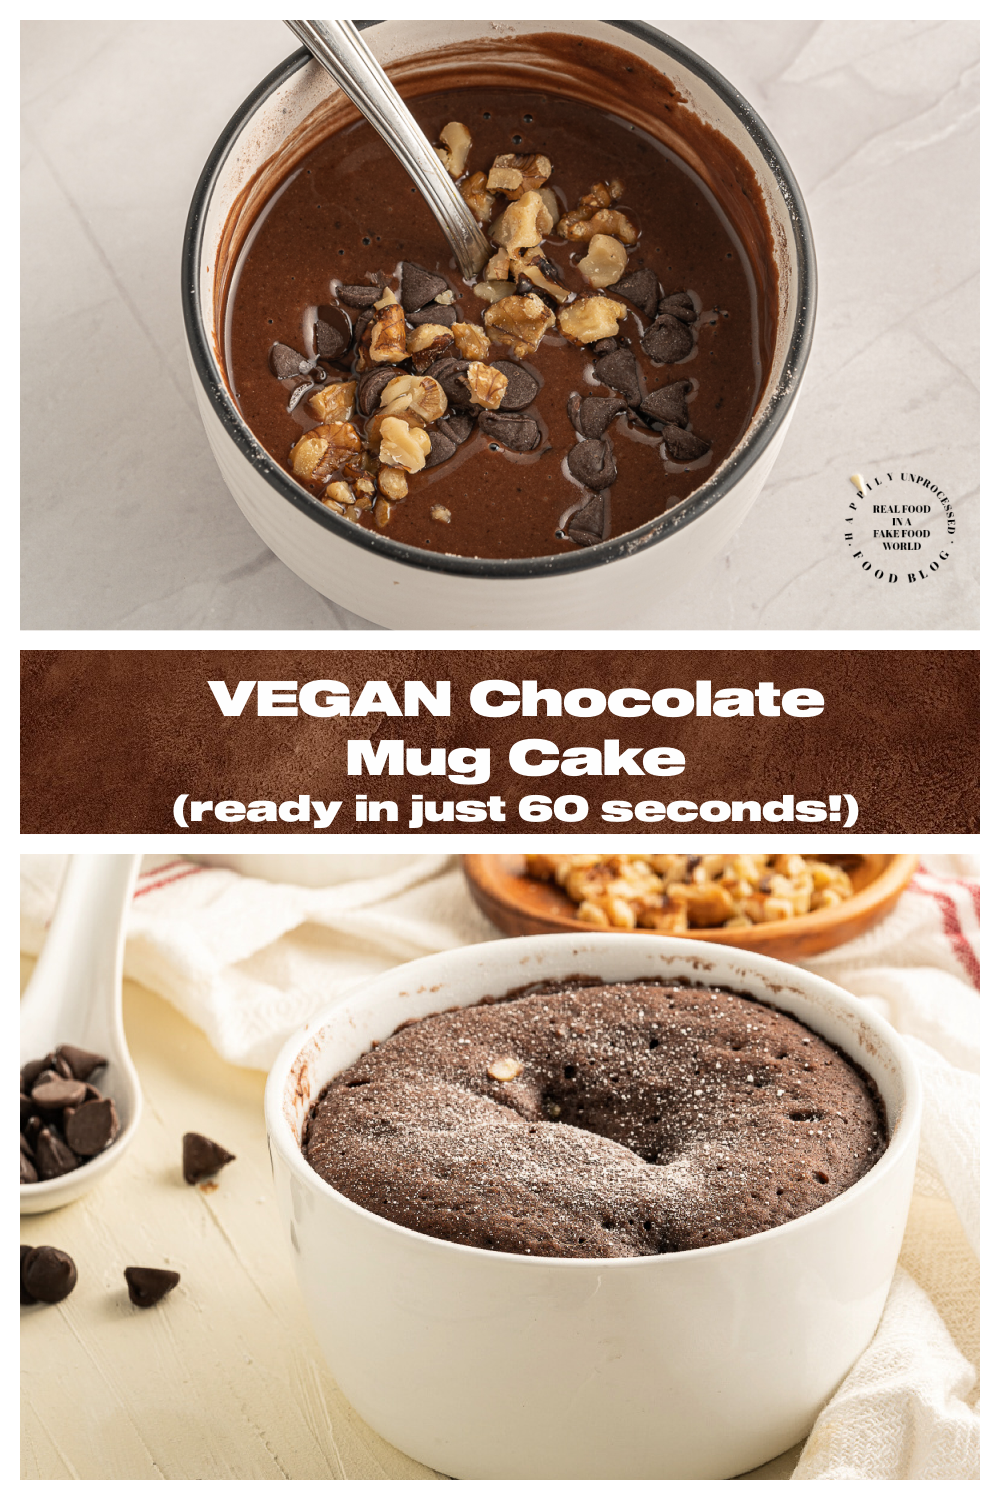 A Vegan Chocolate Mug Cake that's ready in just 60 seconds in the microwave! #mugcake #vegandesserts.